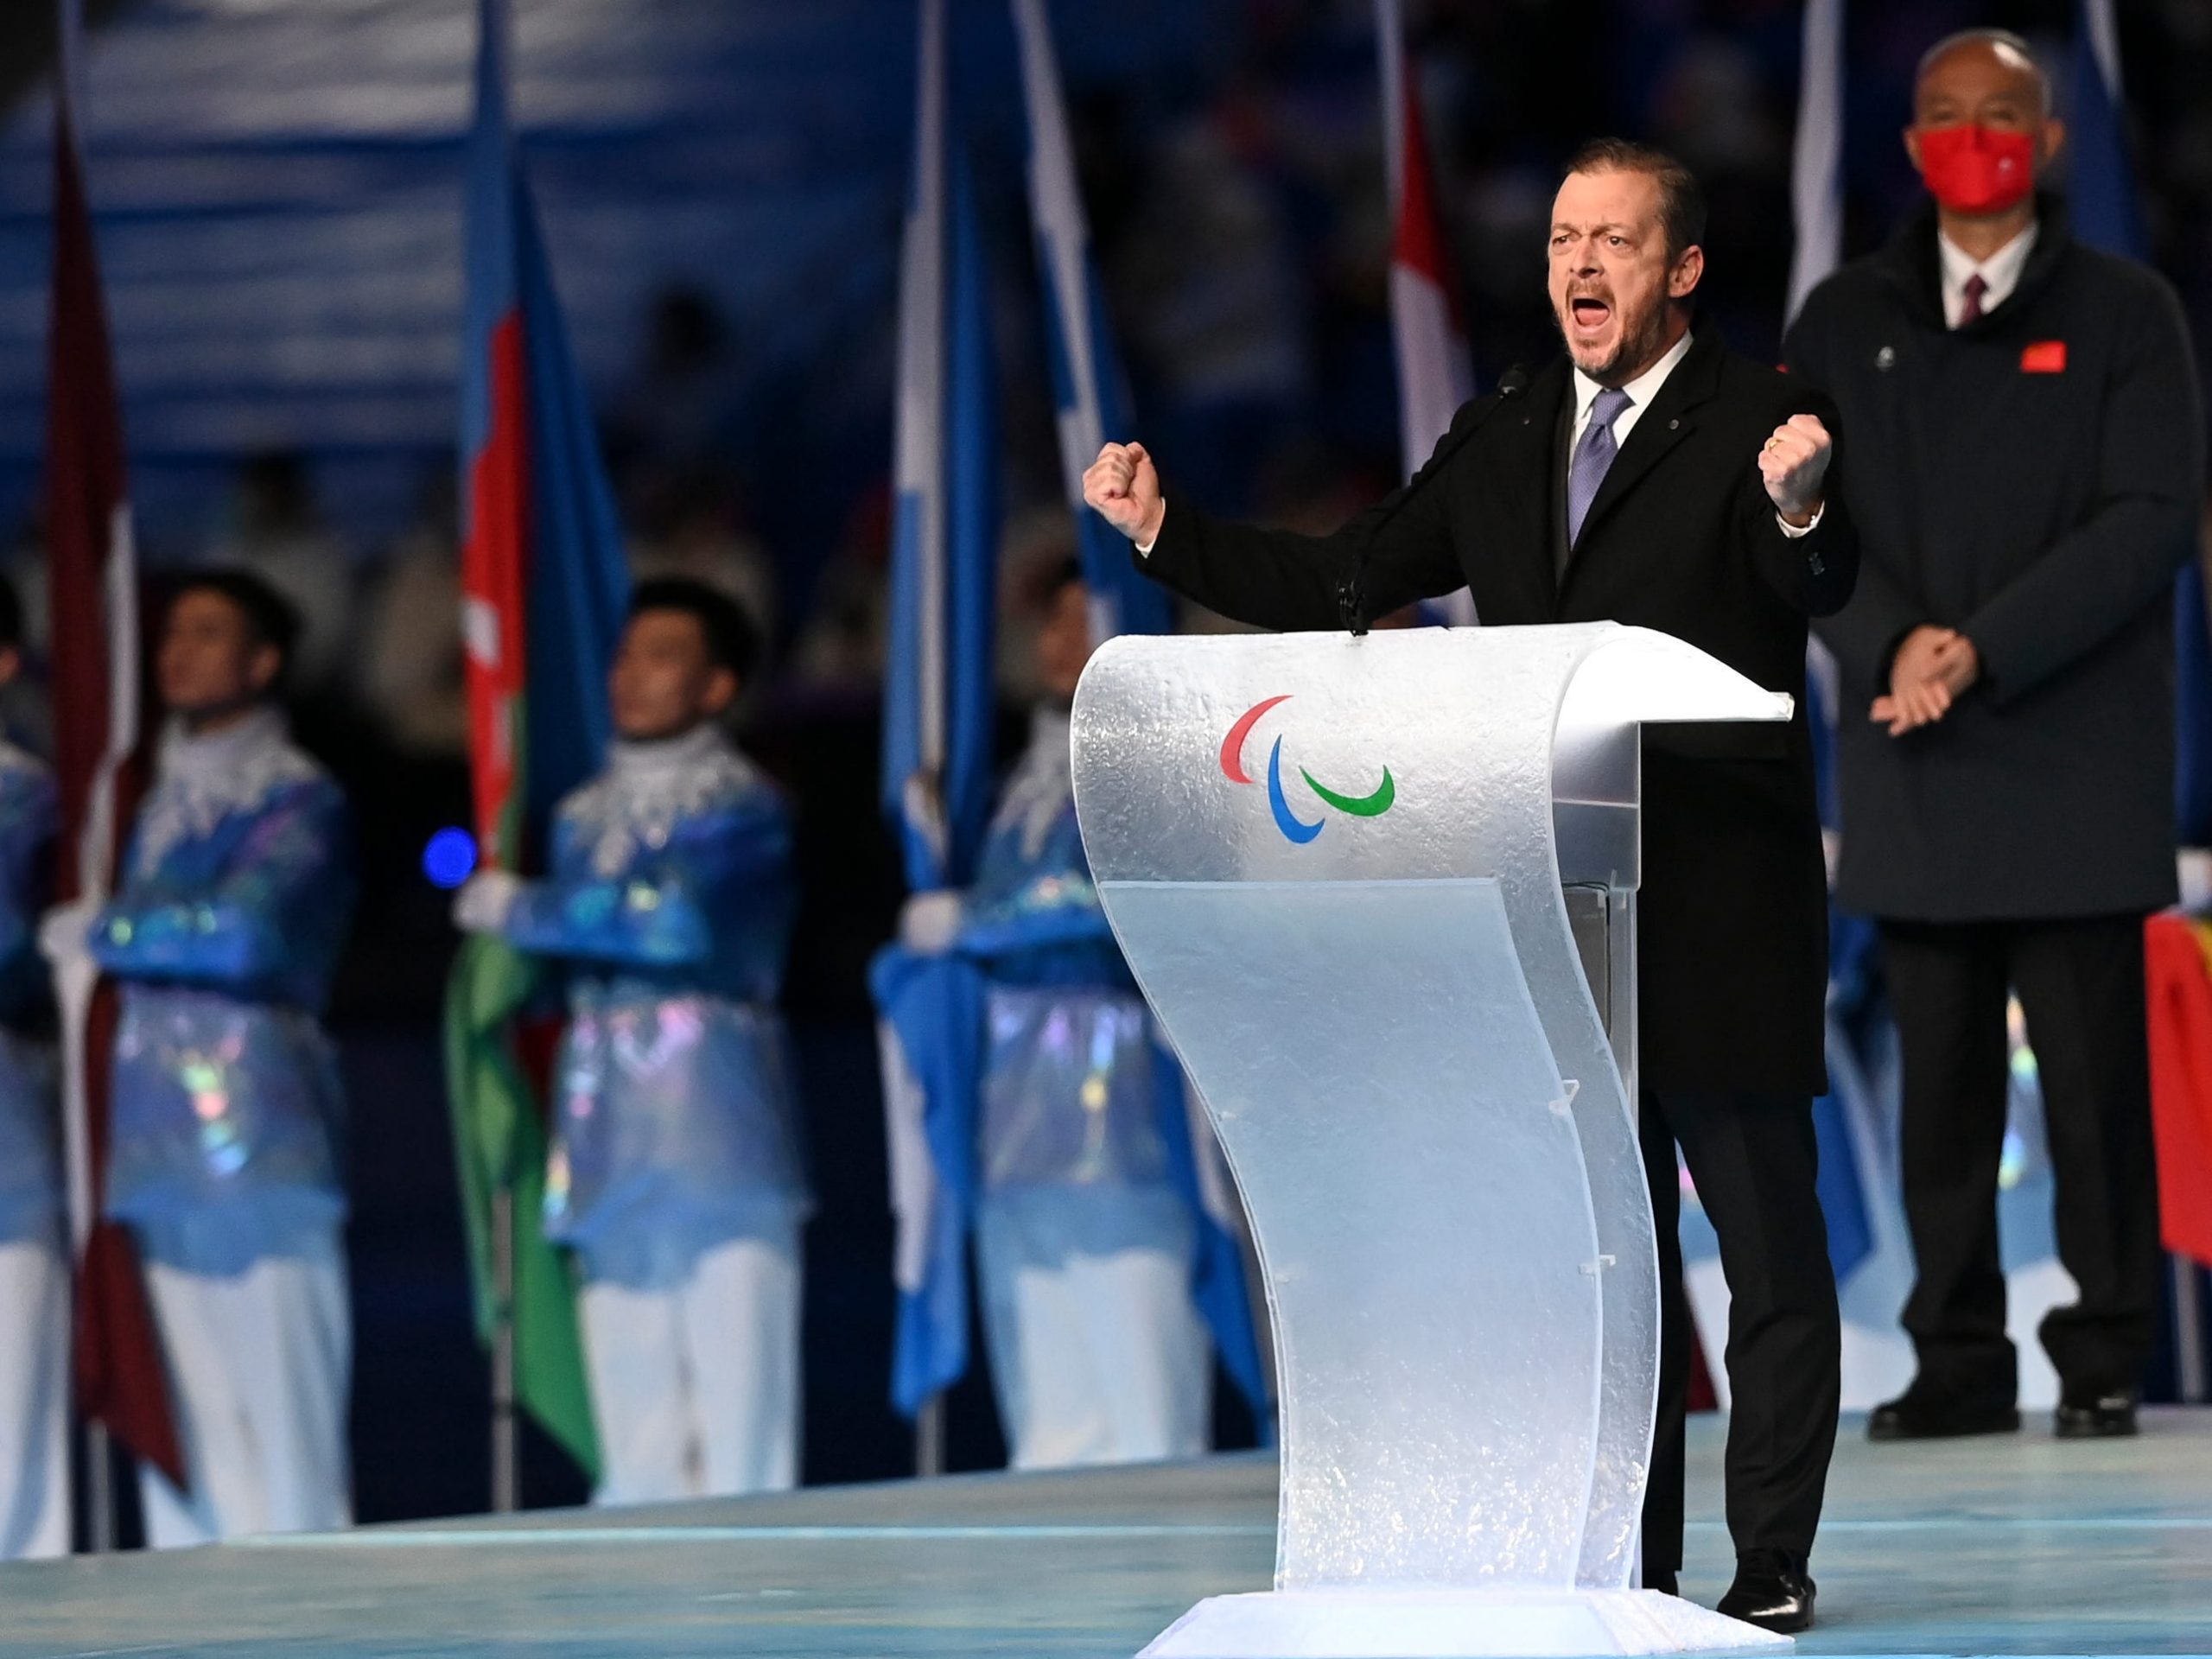 Andrew Parsons, president of the International Paralympic Committee, made a forceful anti-war speech at the opening of the Winter Paralympic Games in Beijing on Saturday.